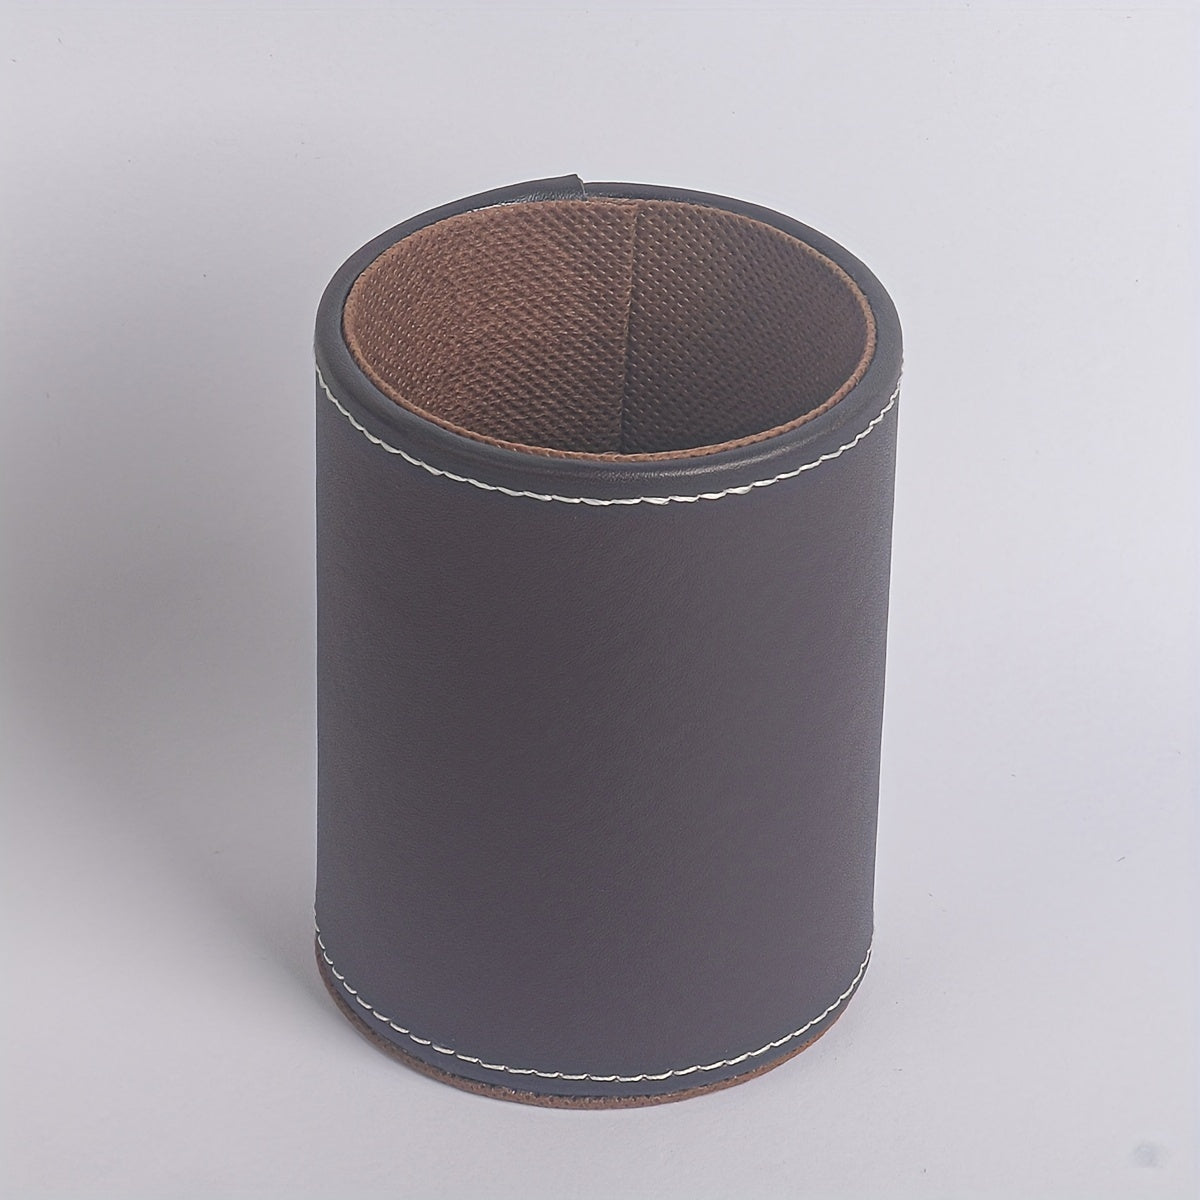 Round pen holder in leather